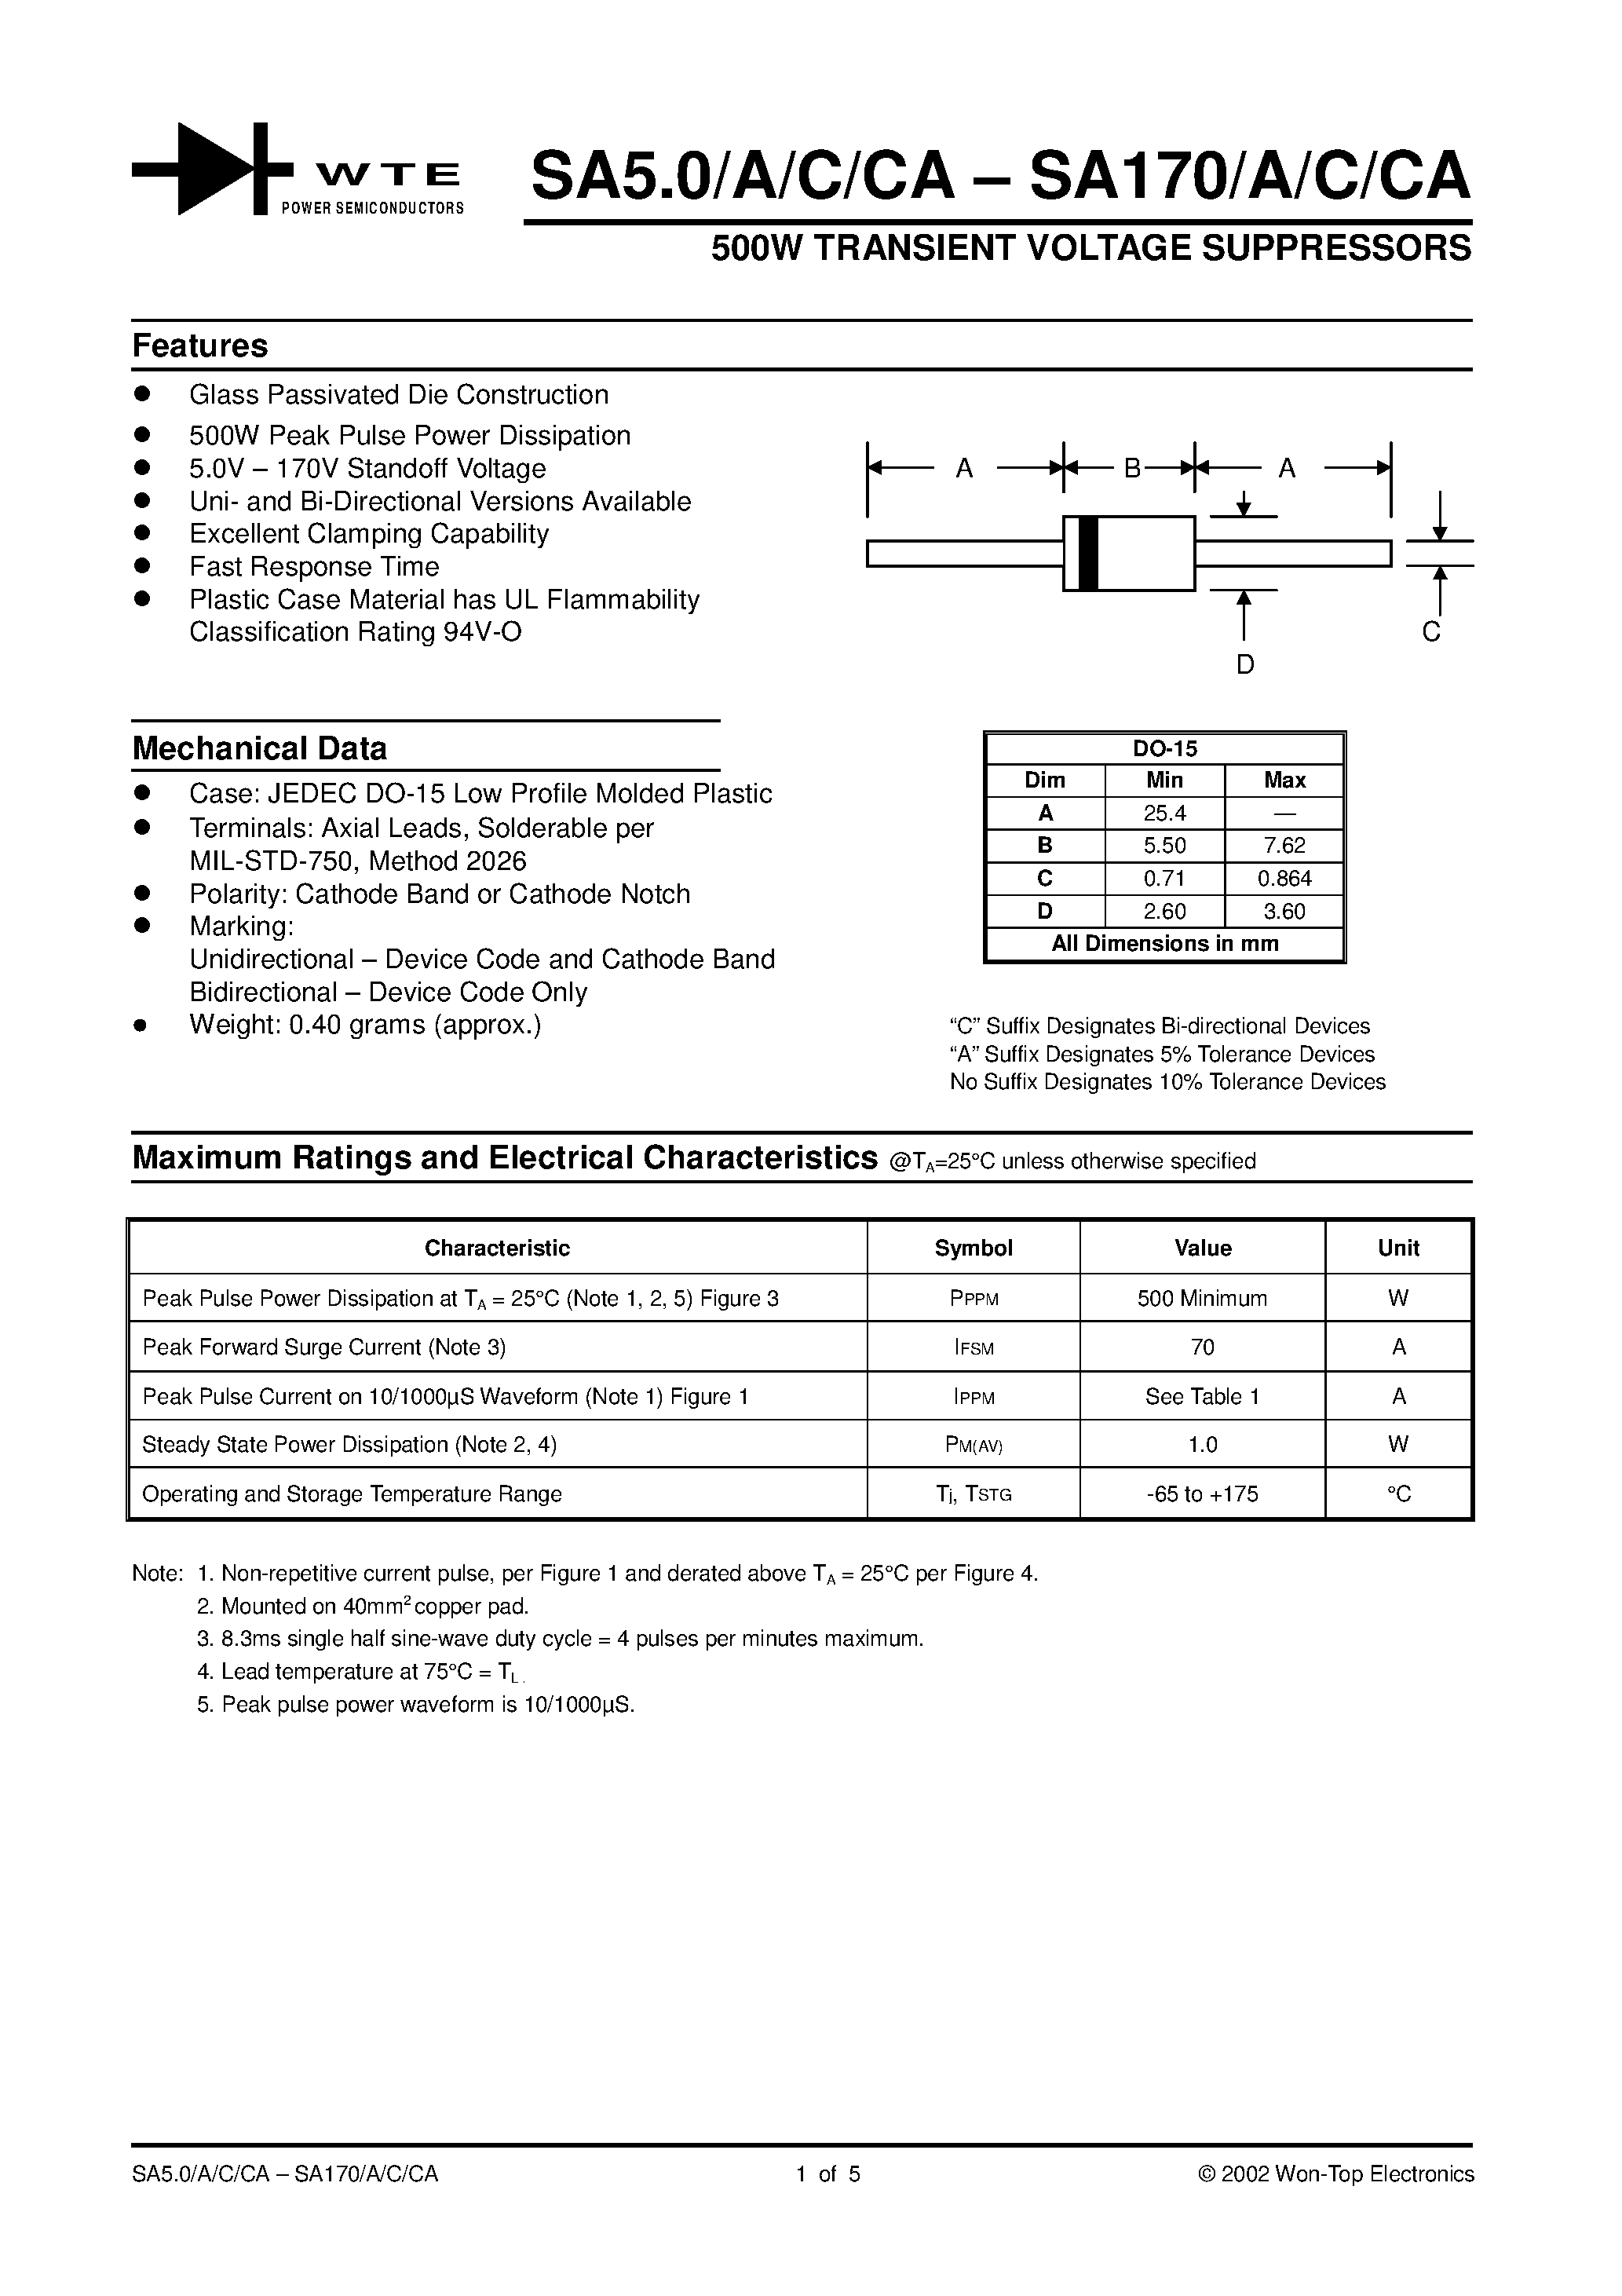 Datasheet SA33A - 500W TRANSIENT VOLTAGE SUPPRESSORS page 1